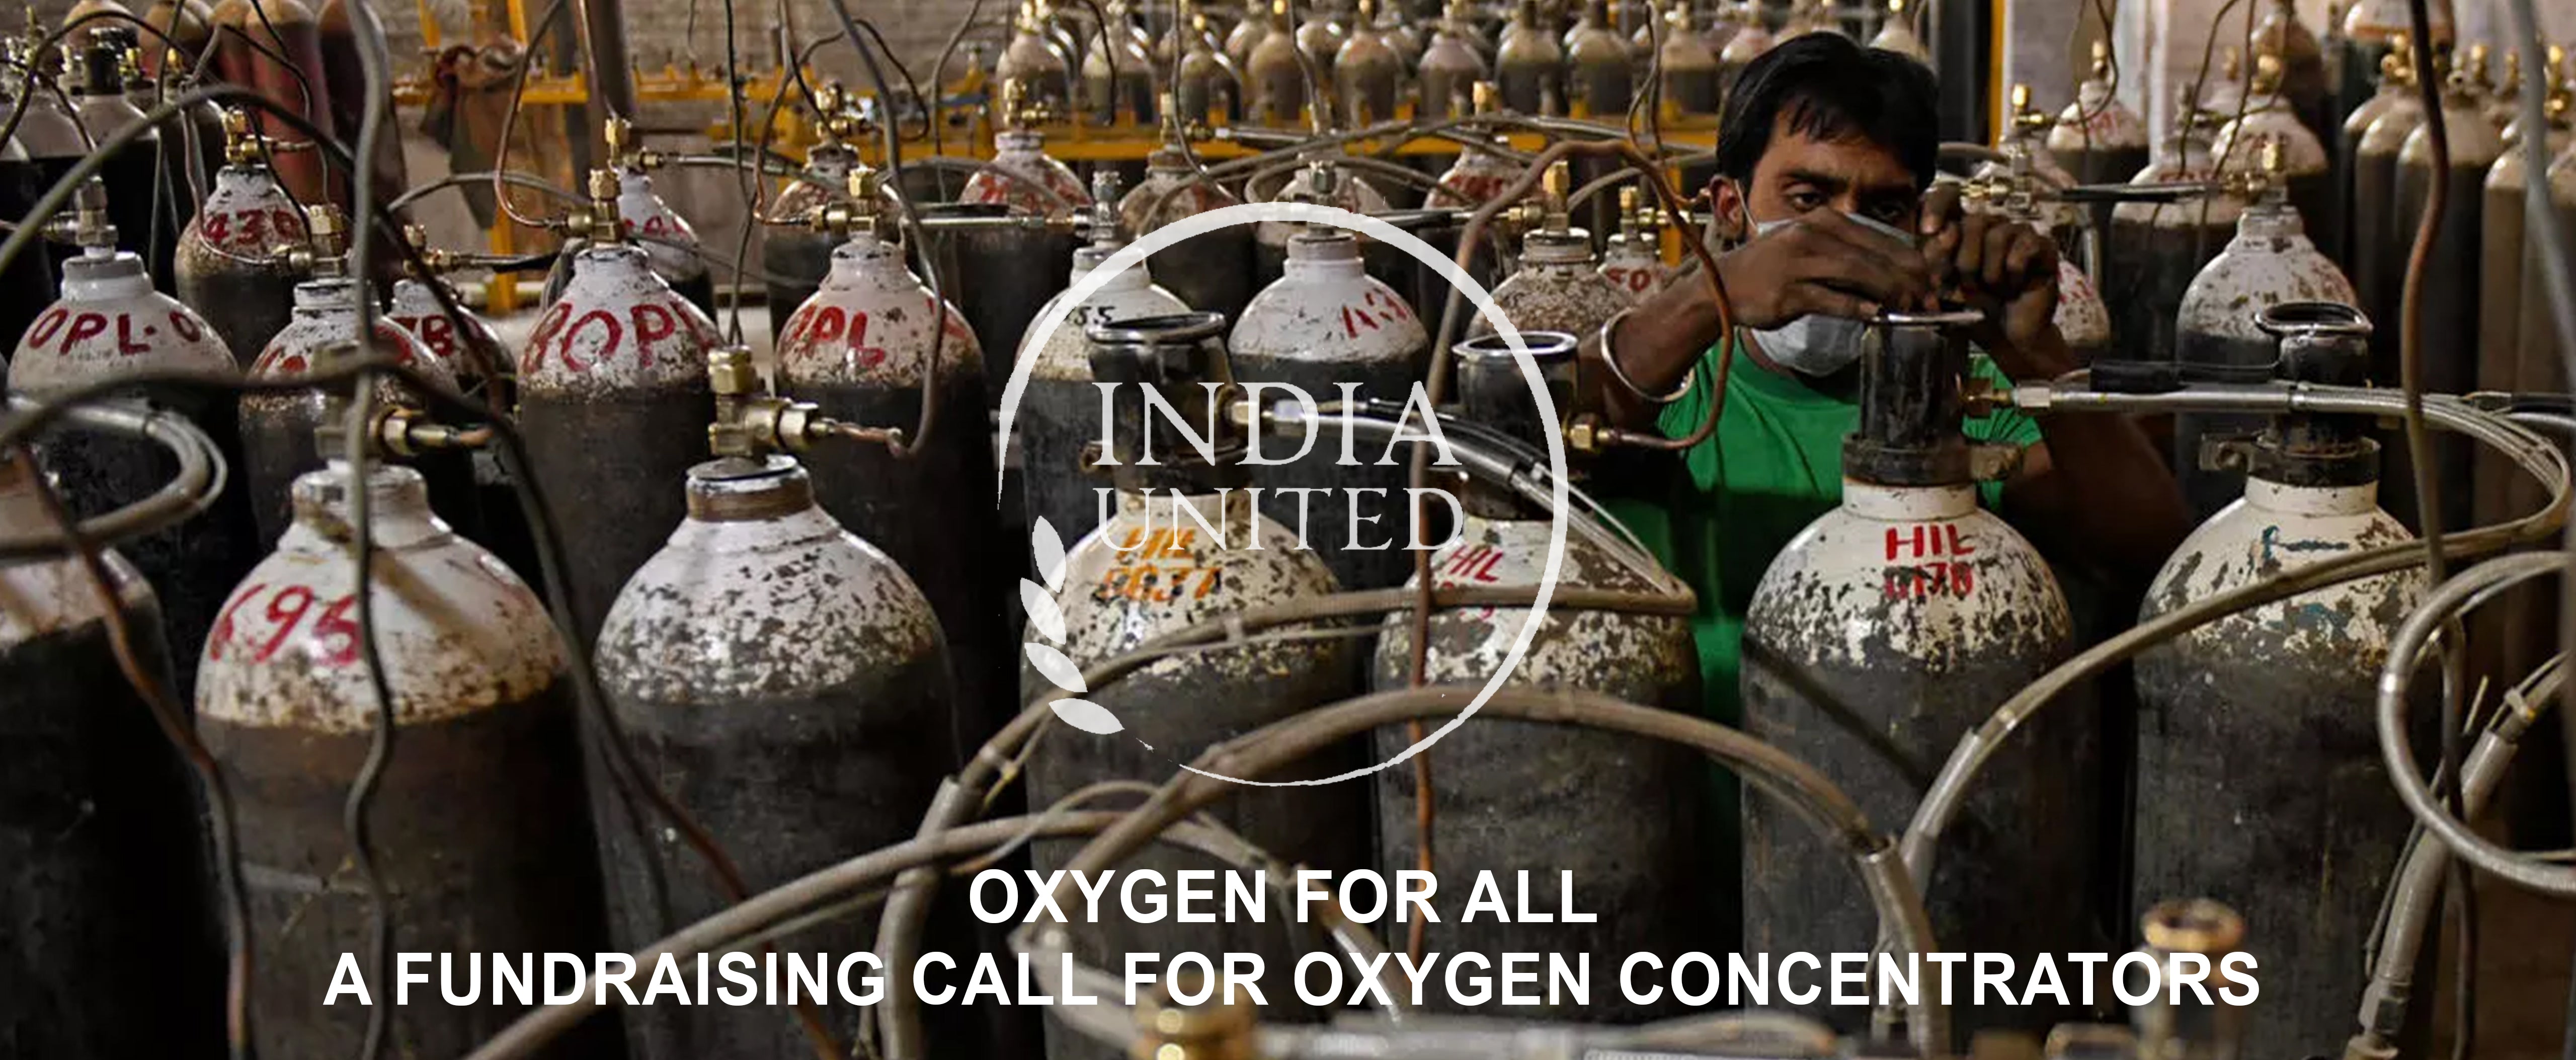 Oxygen For All - A Fundraising Call For Oxygen Concentrators | Crystal Bar Soap